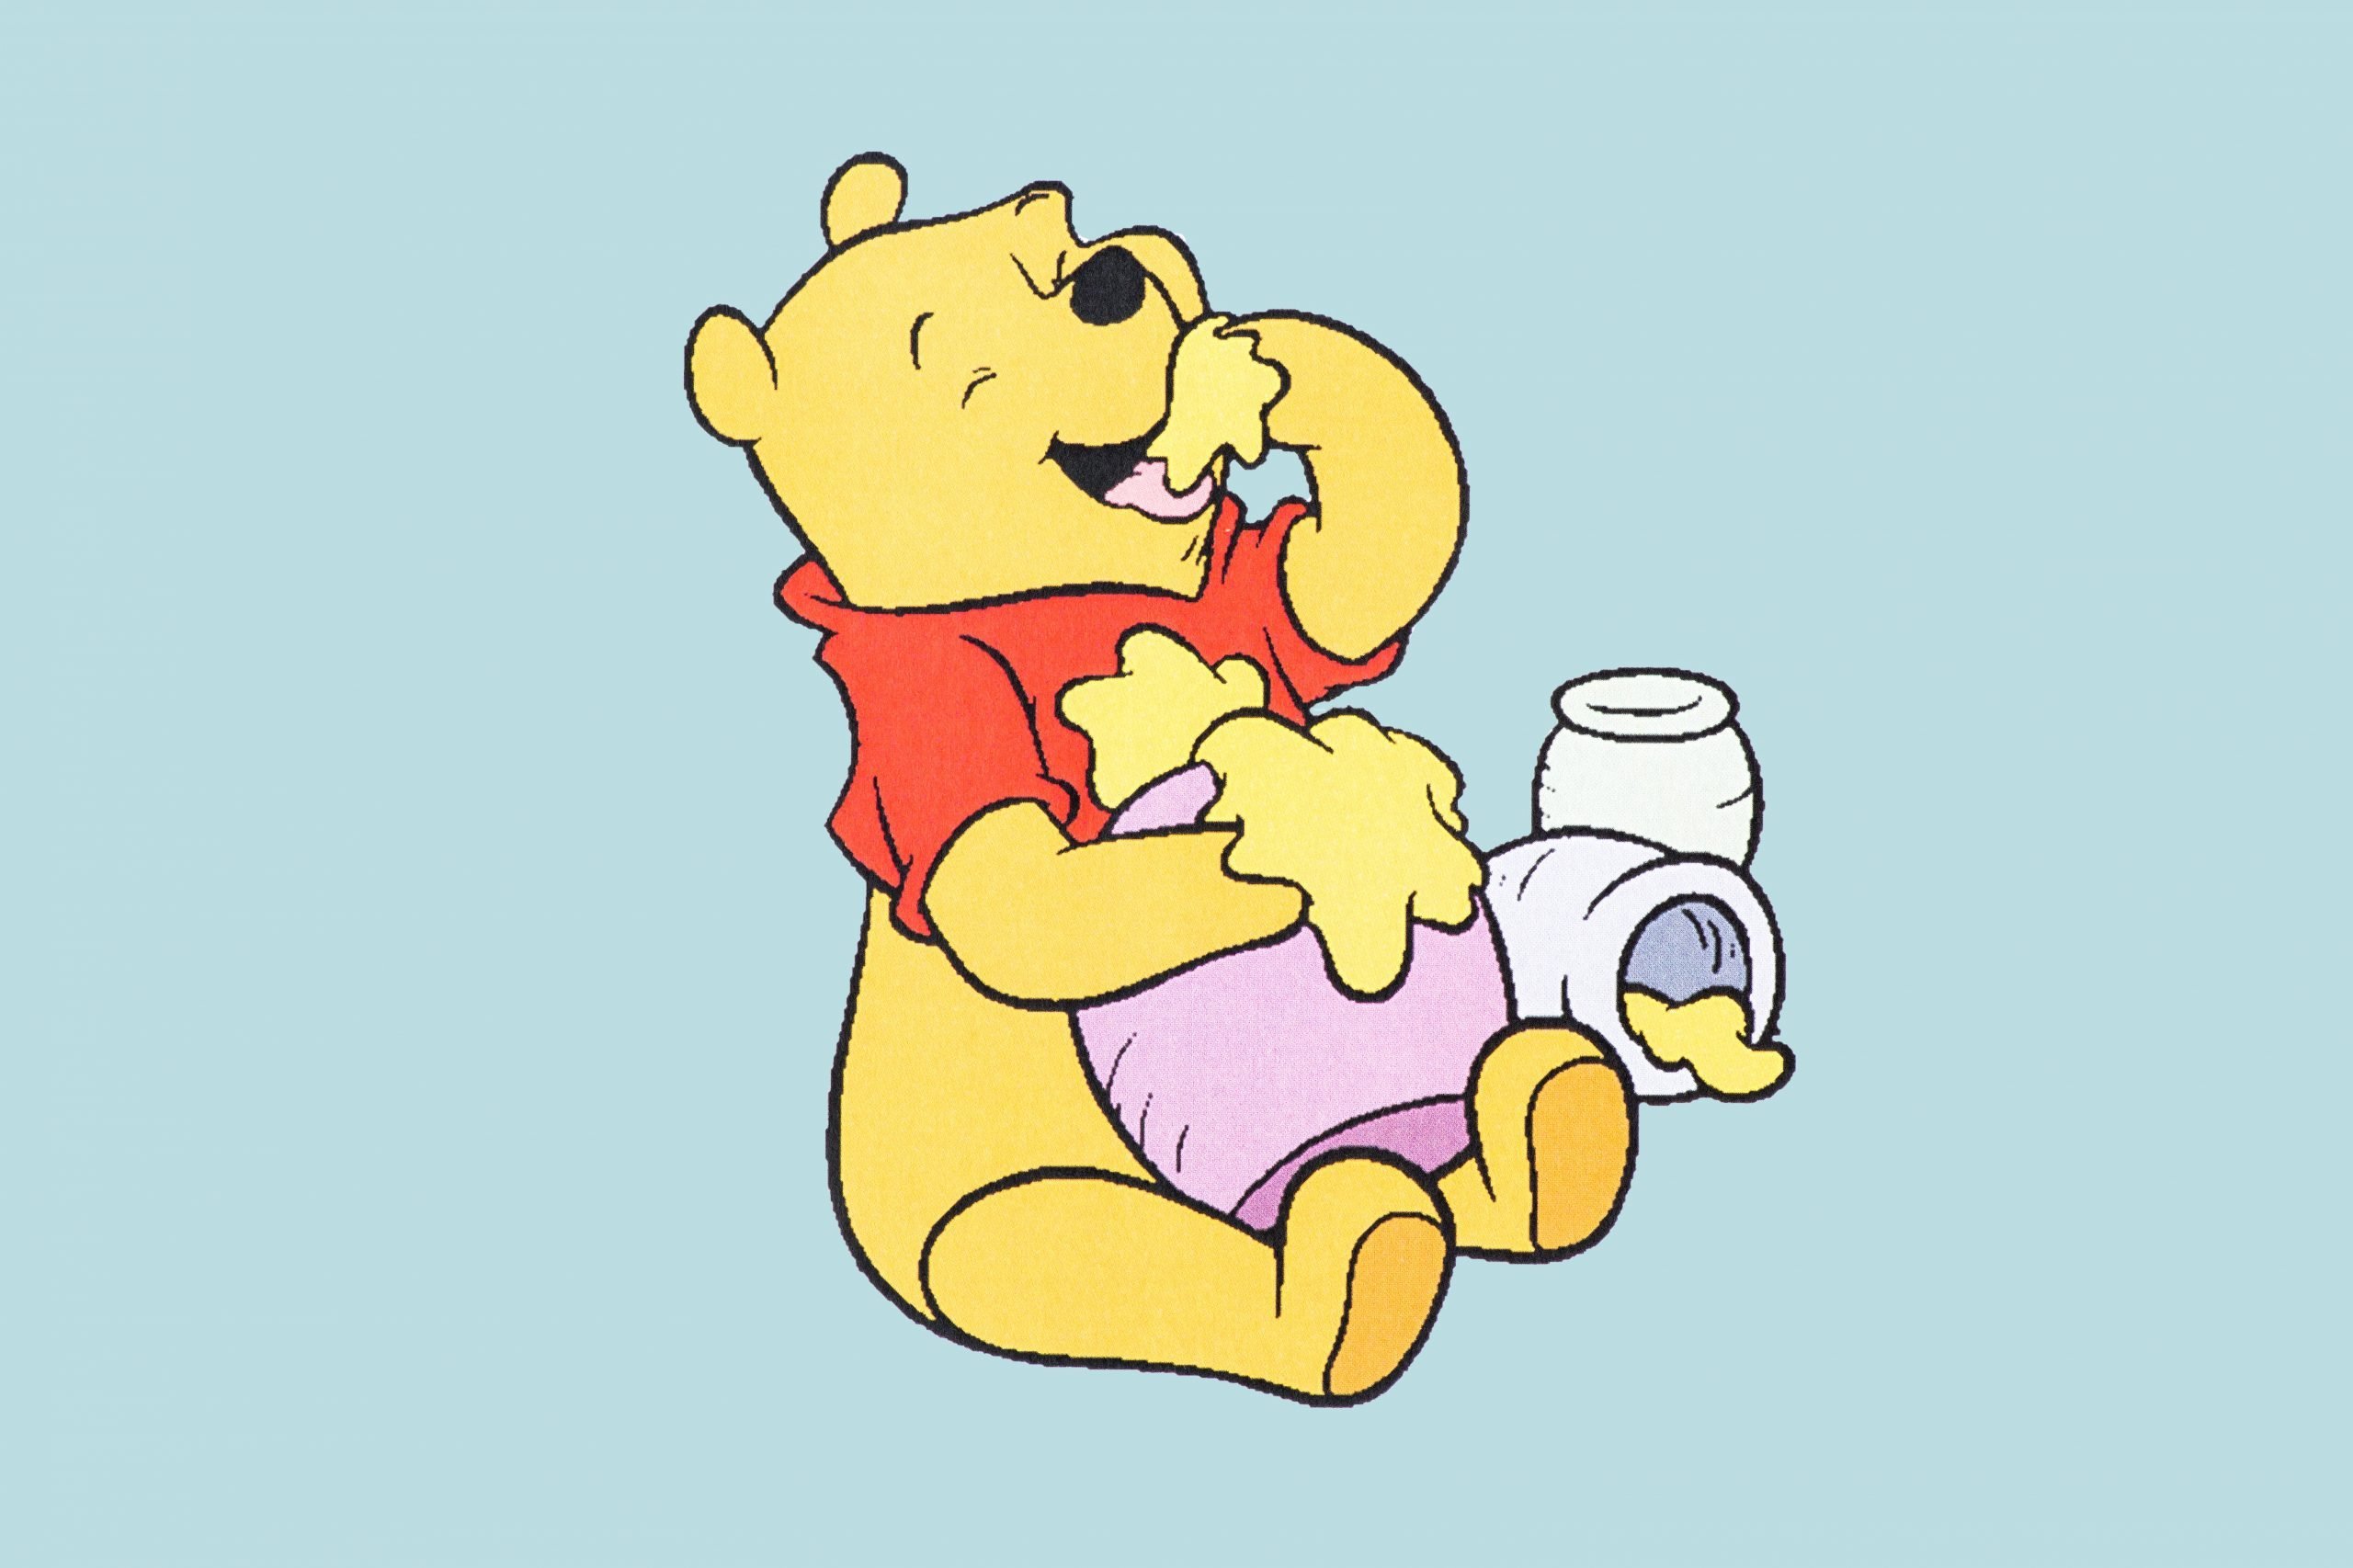 Winnie the pooh life lessons: 10 important life lessons by winnie the pooh